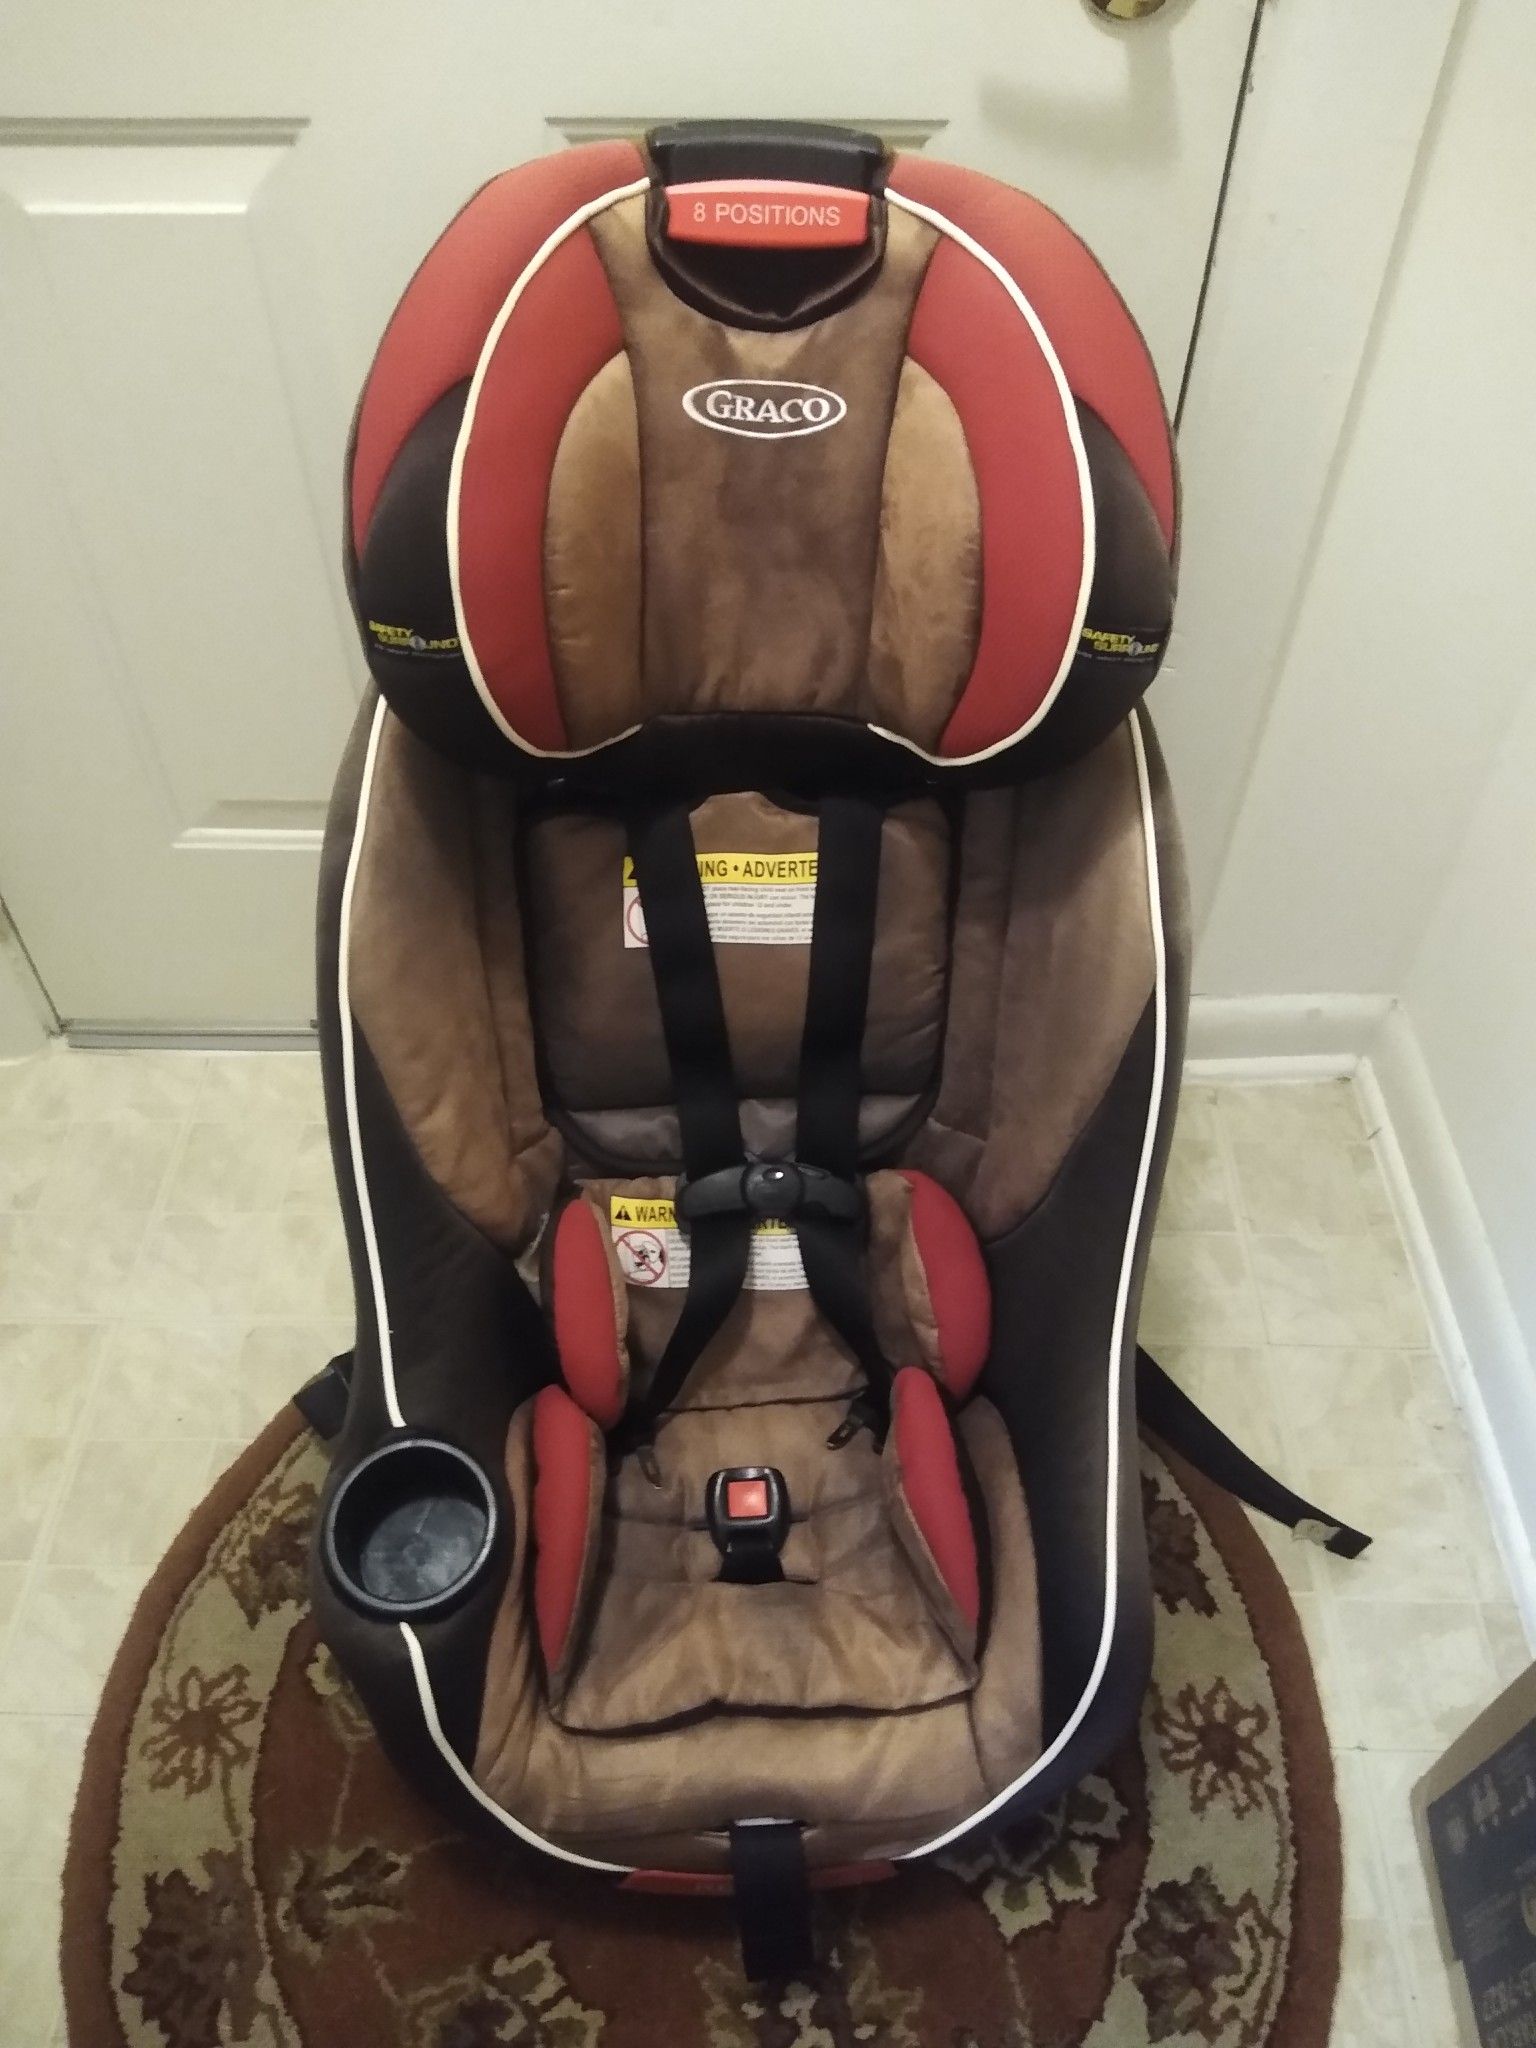 Used car seat wash and clean 40.00